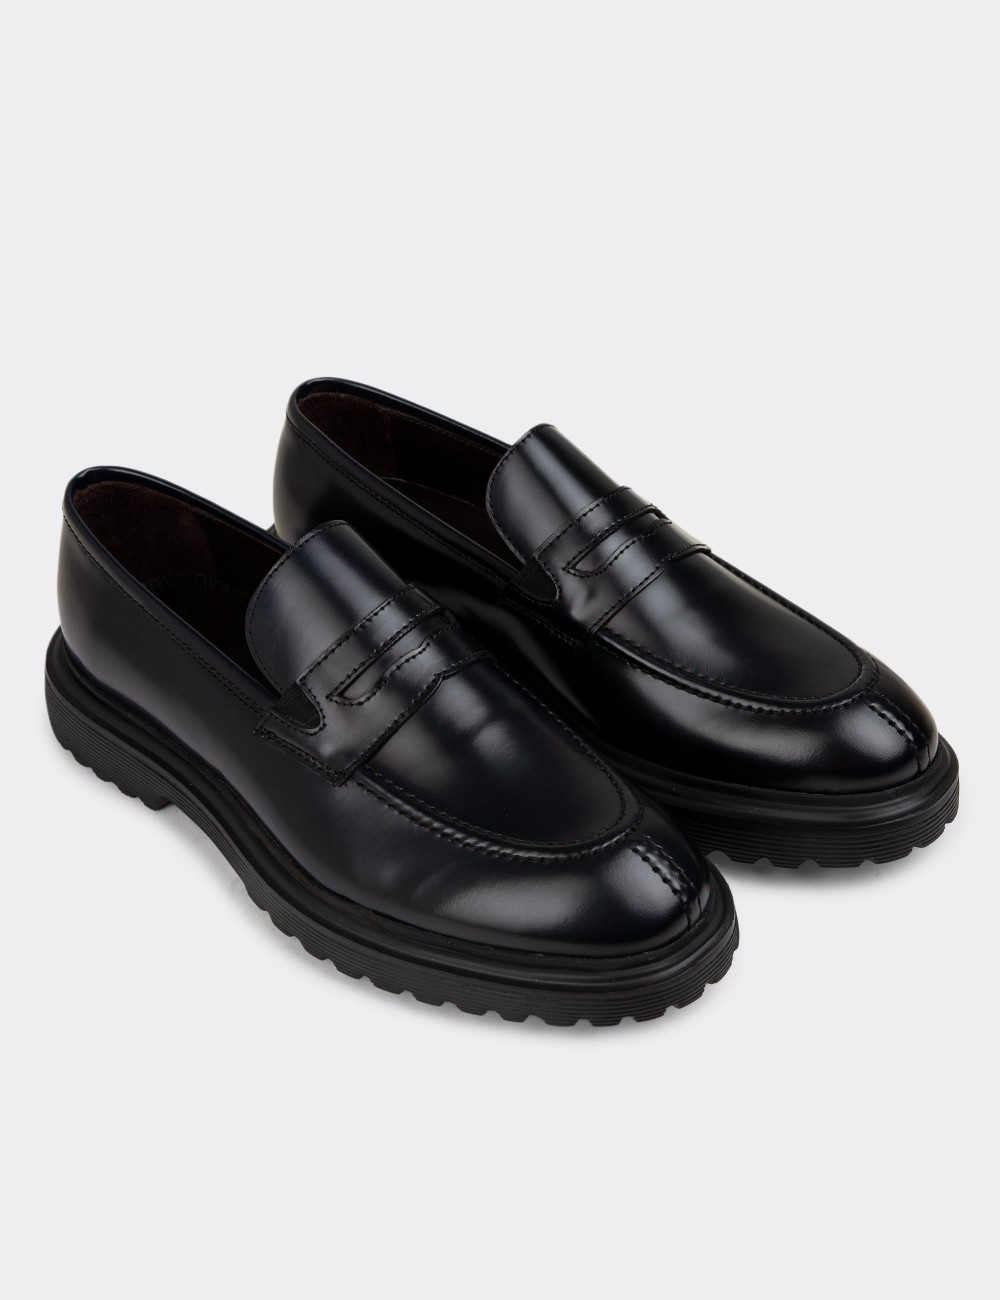 Navy Leather Loafers - 01878MLCVE01